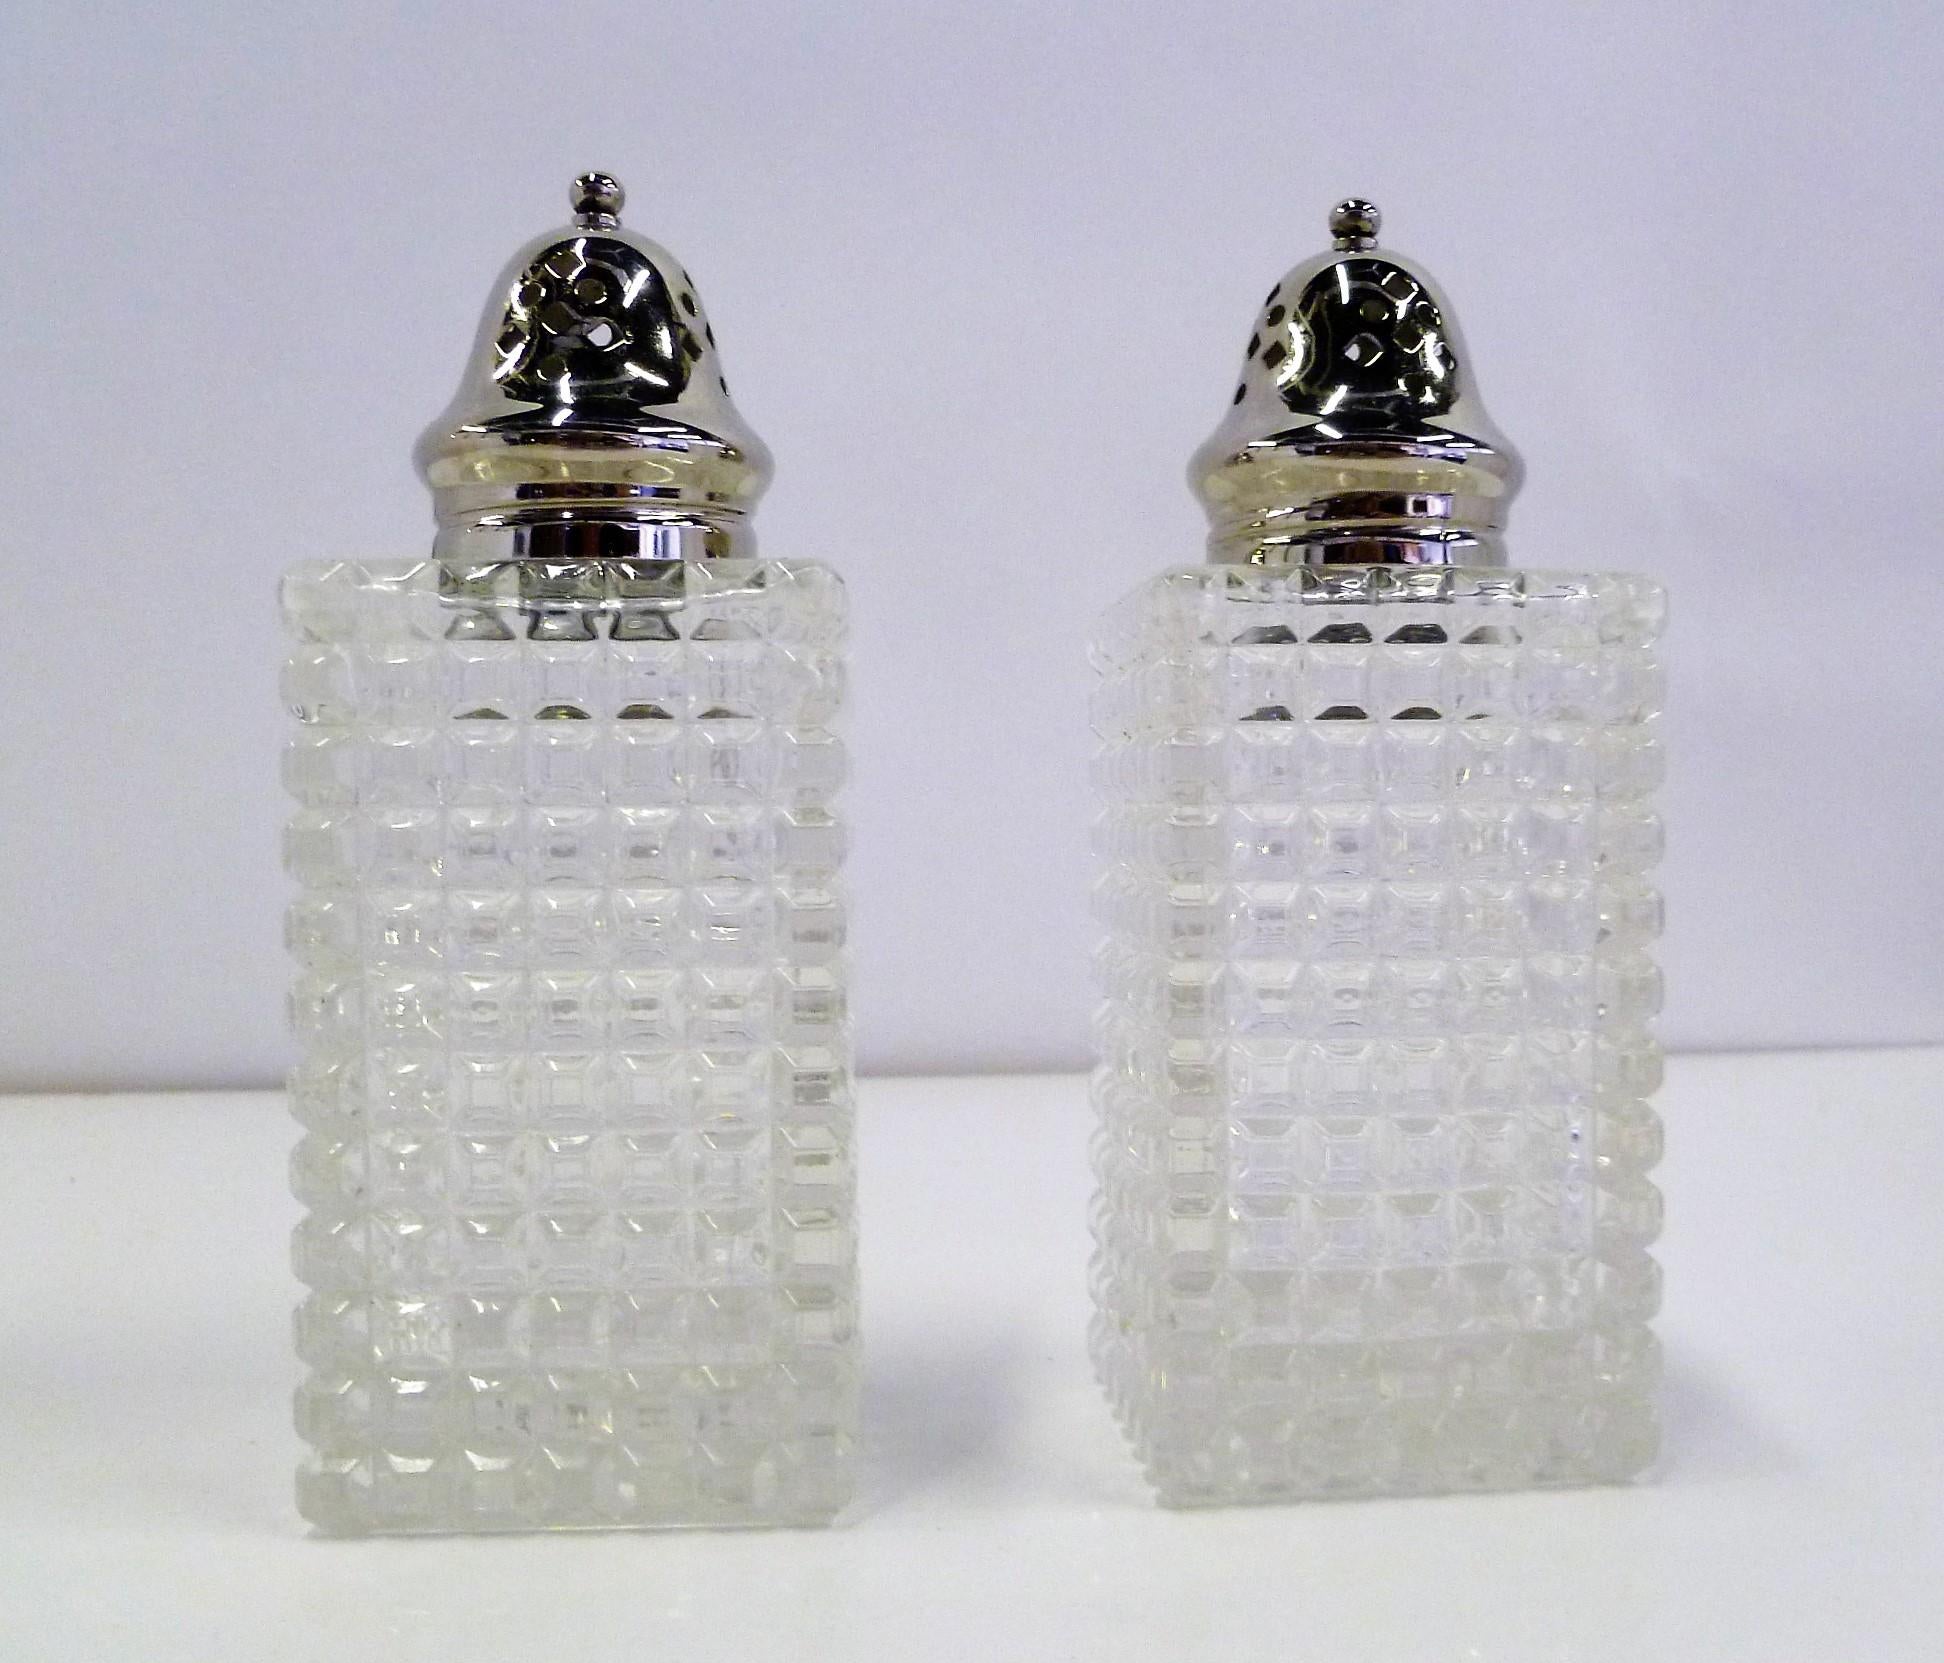 Here a pair of antique, probably Edwardian, English brilliant cut crystal sugar shaker and Muffineer Caster. With their open blocks (Diamonds) pattern and straight sides, they are an elegant and useful addition to any kitchen or table used as salt